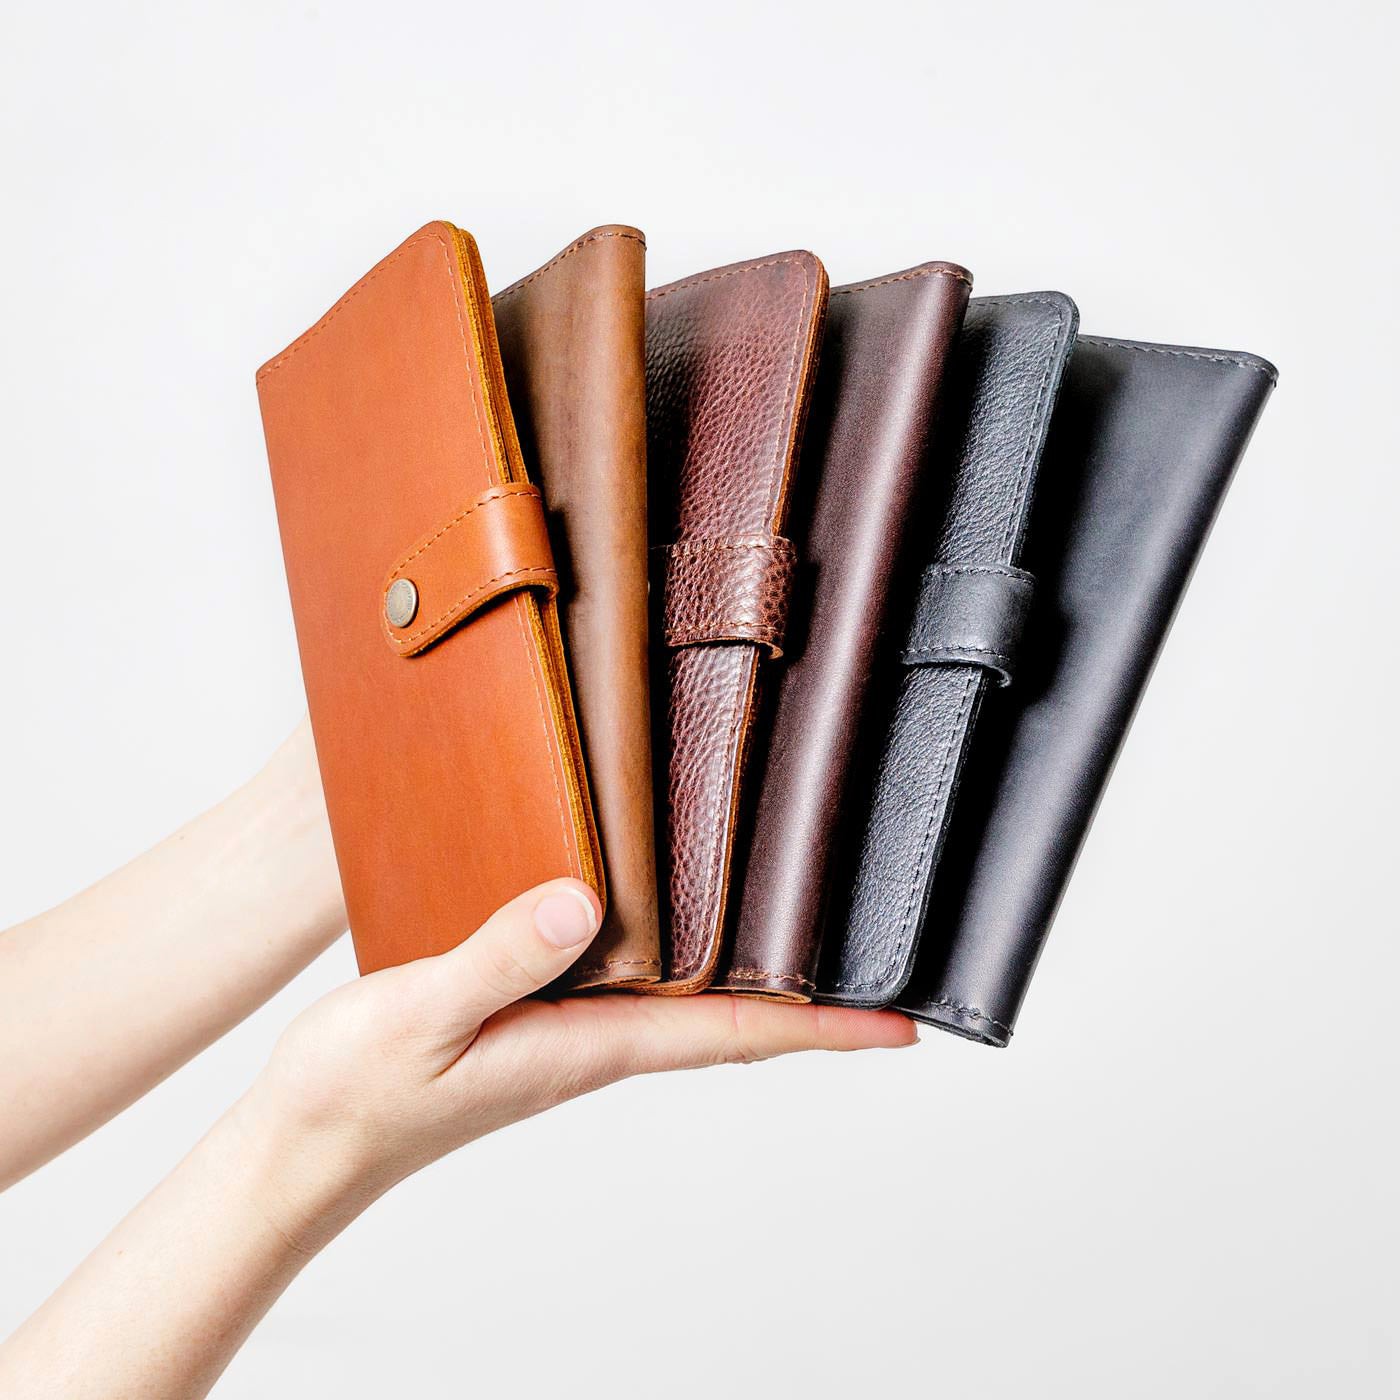 Almost Perfect' Women's Bifold Wallet, Portland Leather